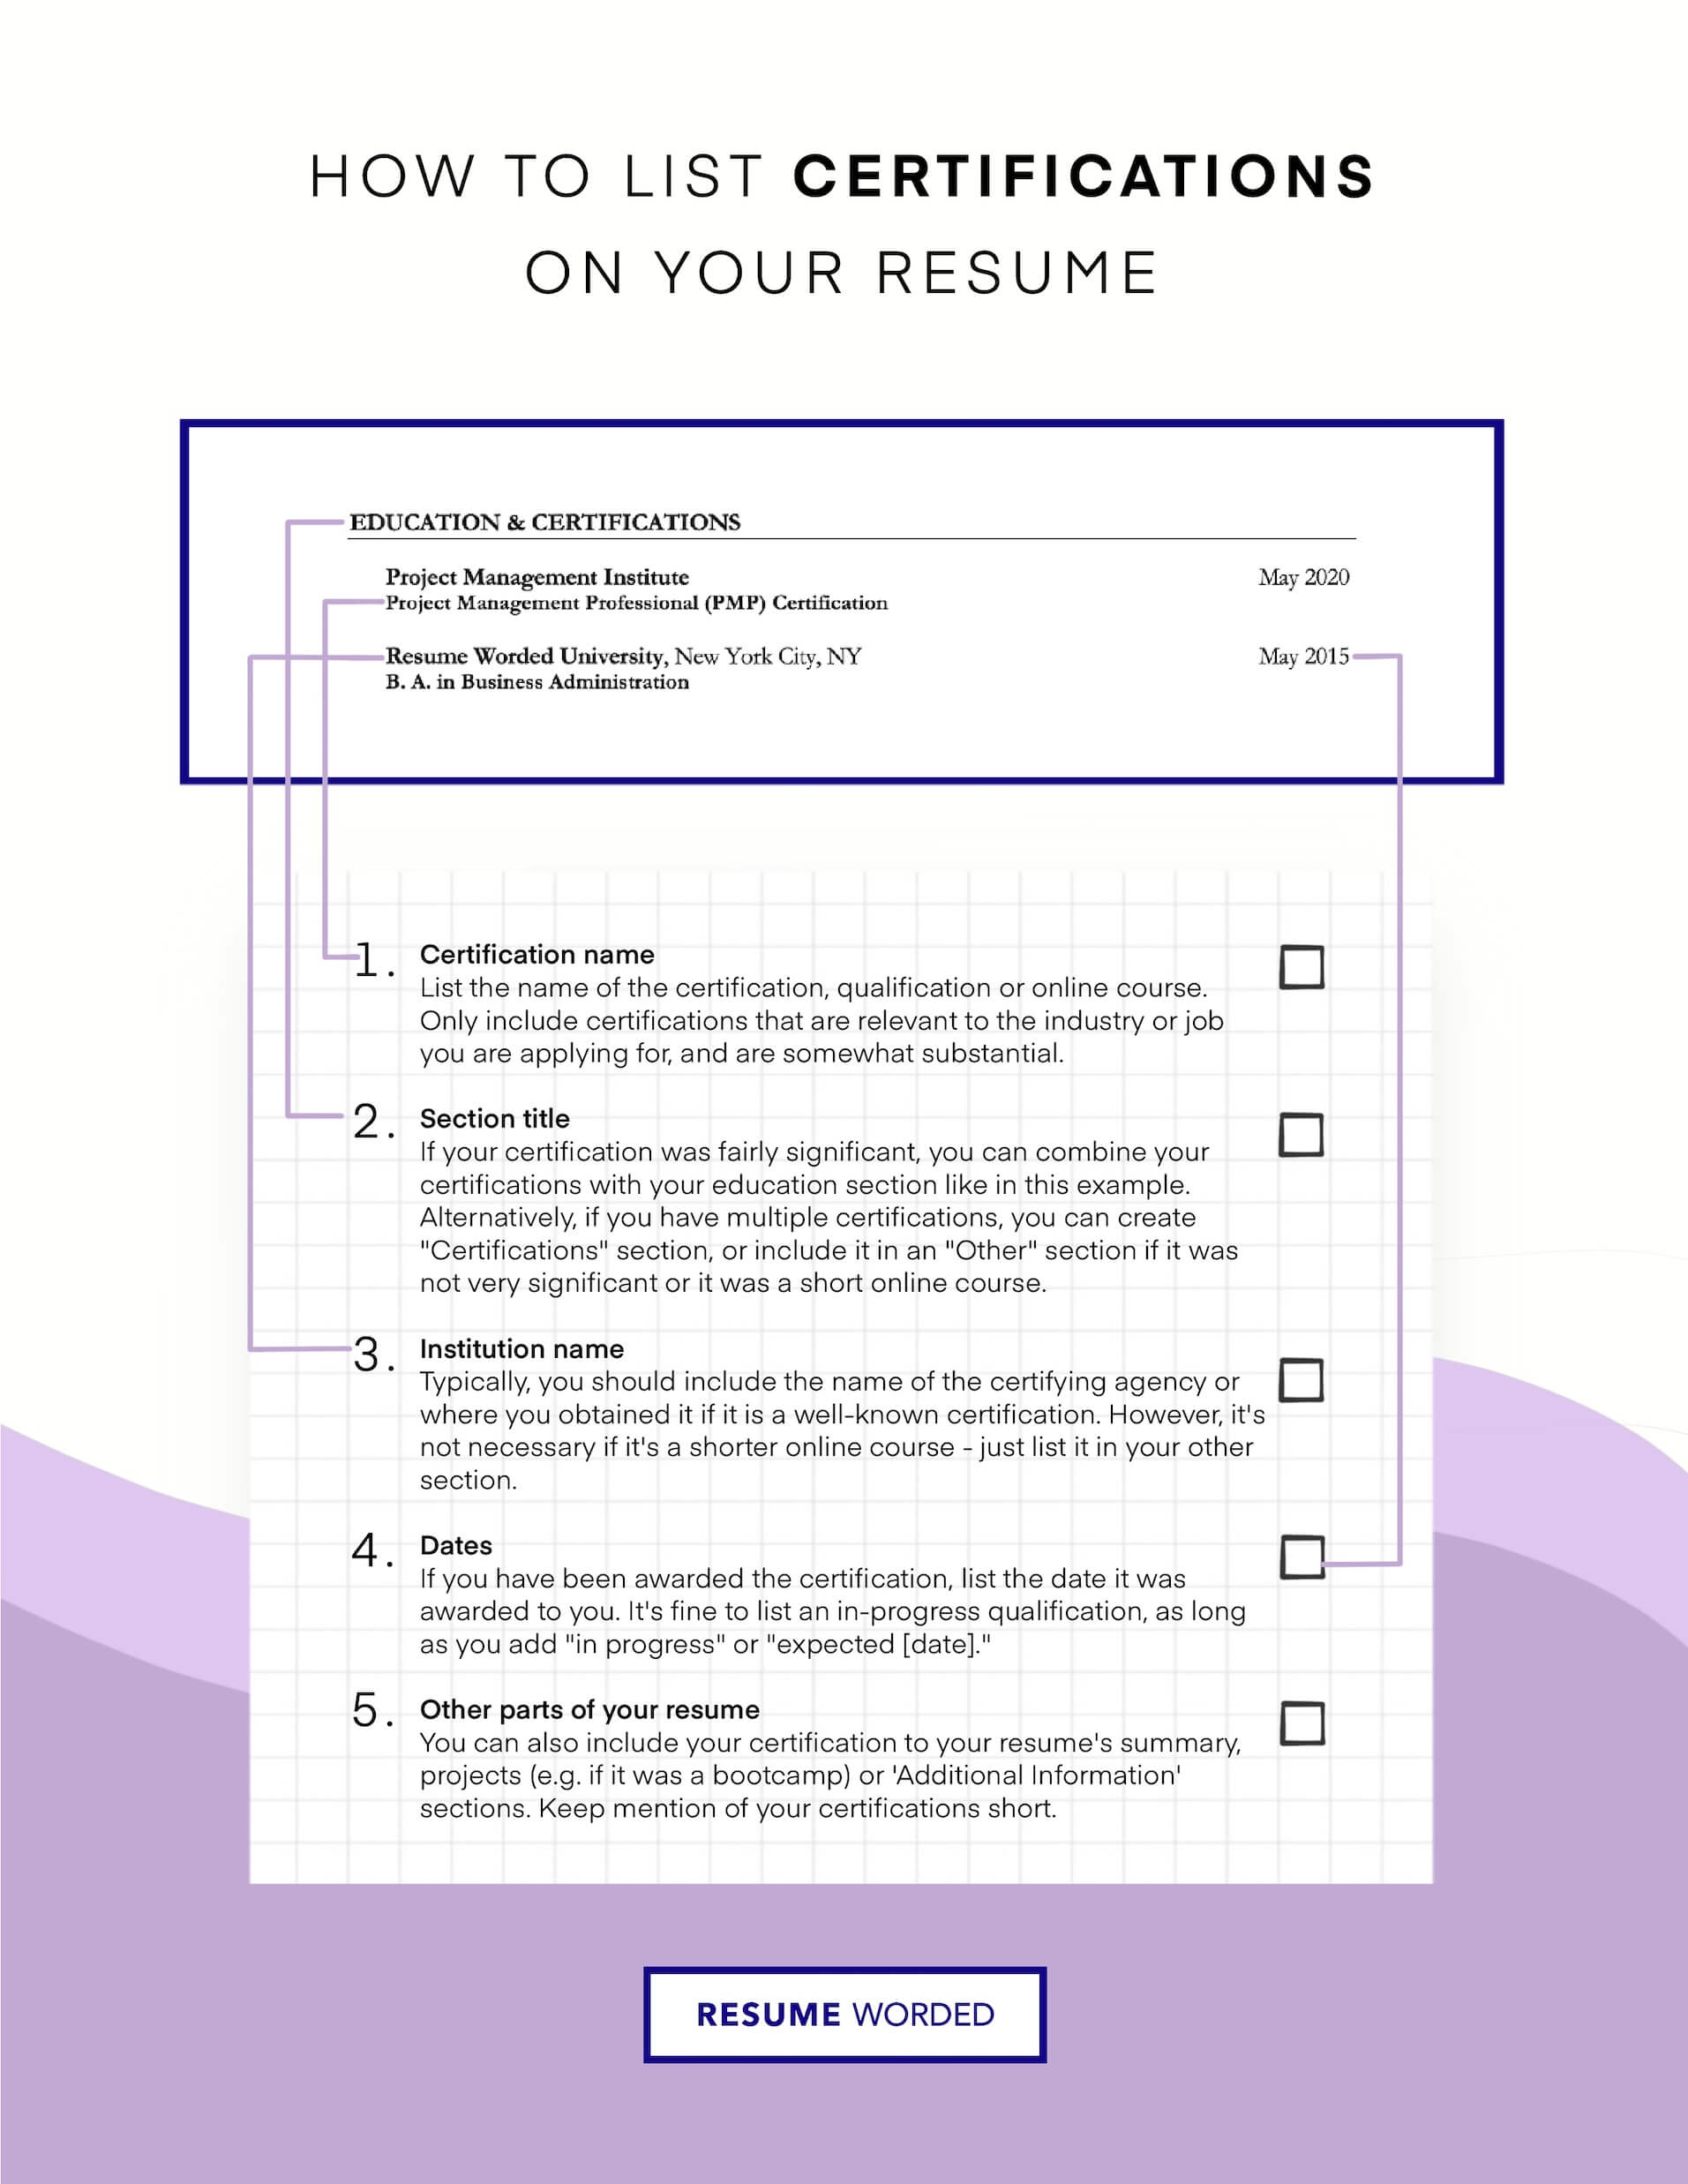 Highlight Relevant Certifications - Quality Control Manager Resume